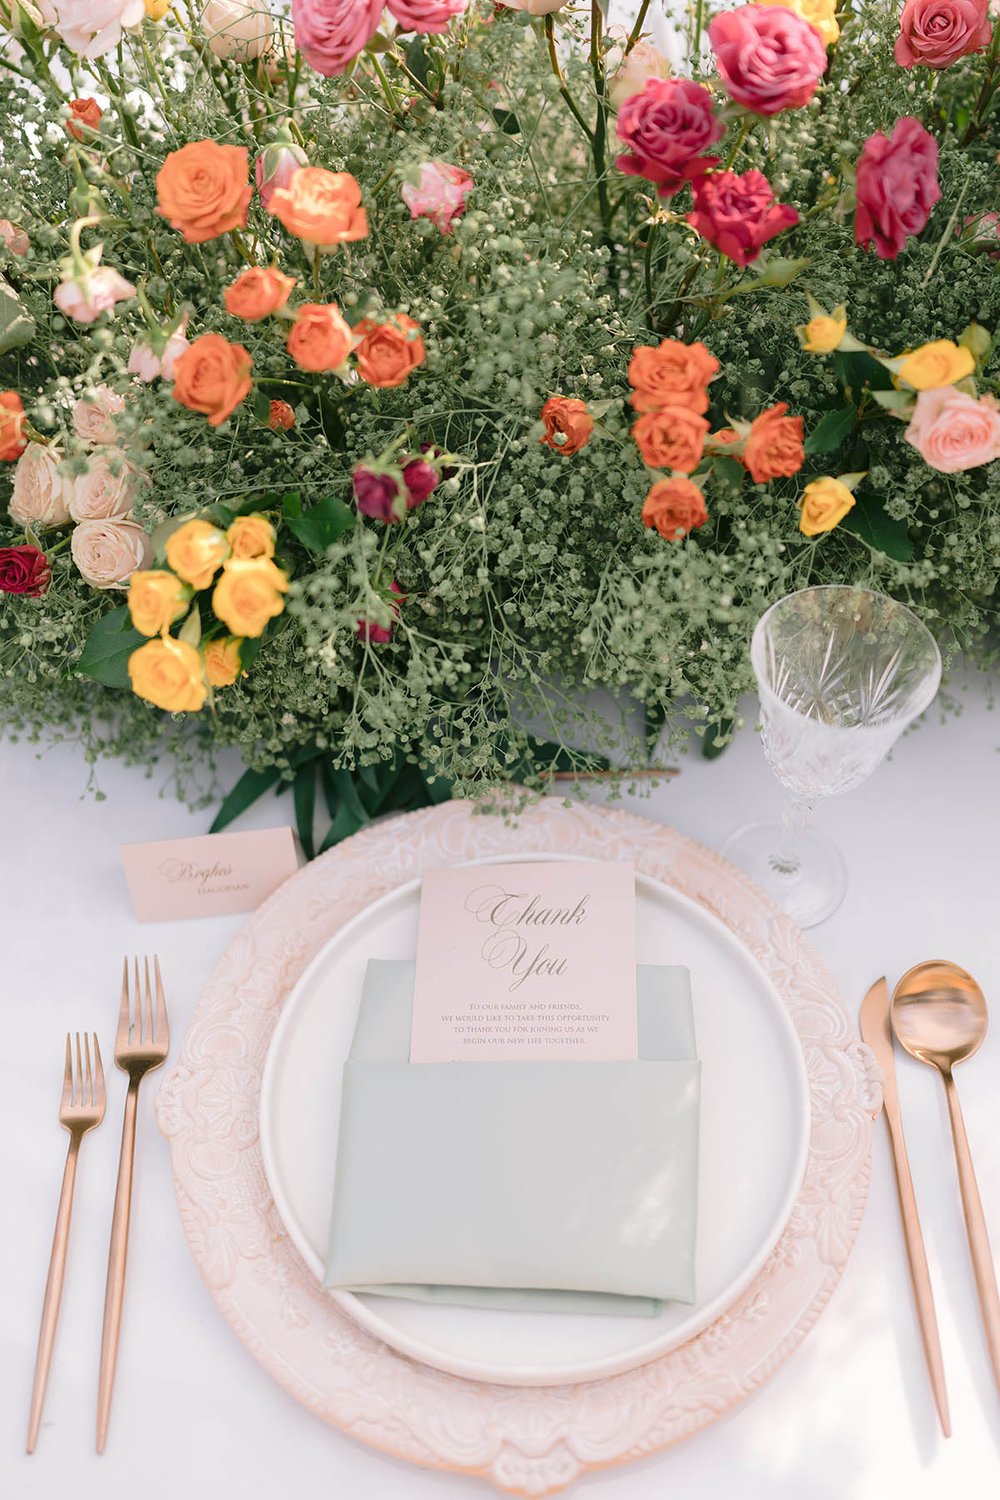 Colorful spring wedding florals at a dinner place setting - LA reception designed by Eddie Zaratsian Lifestyle and Design